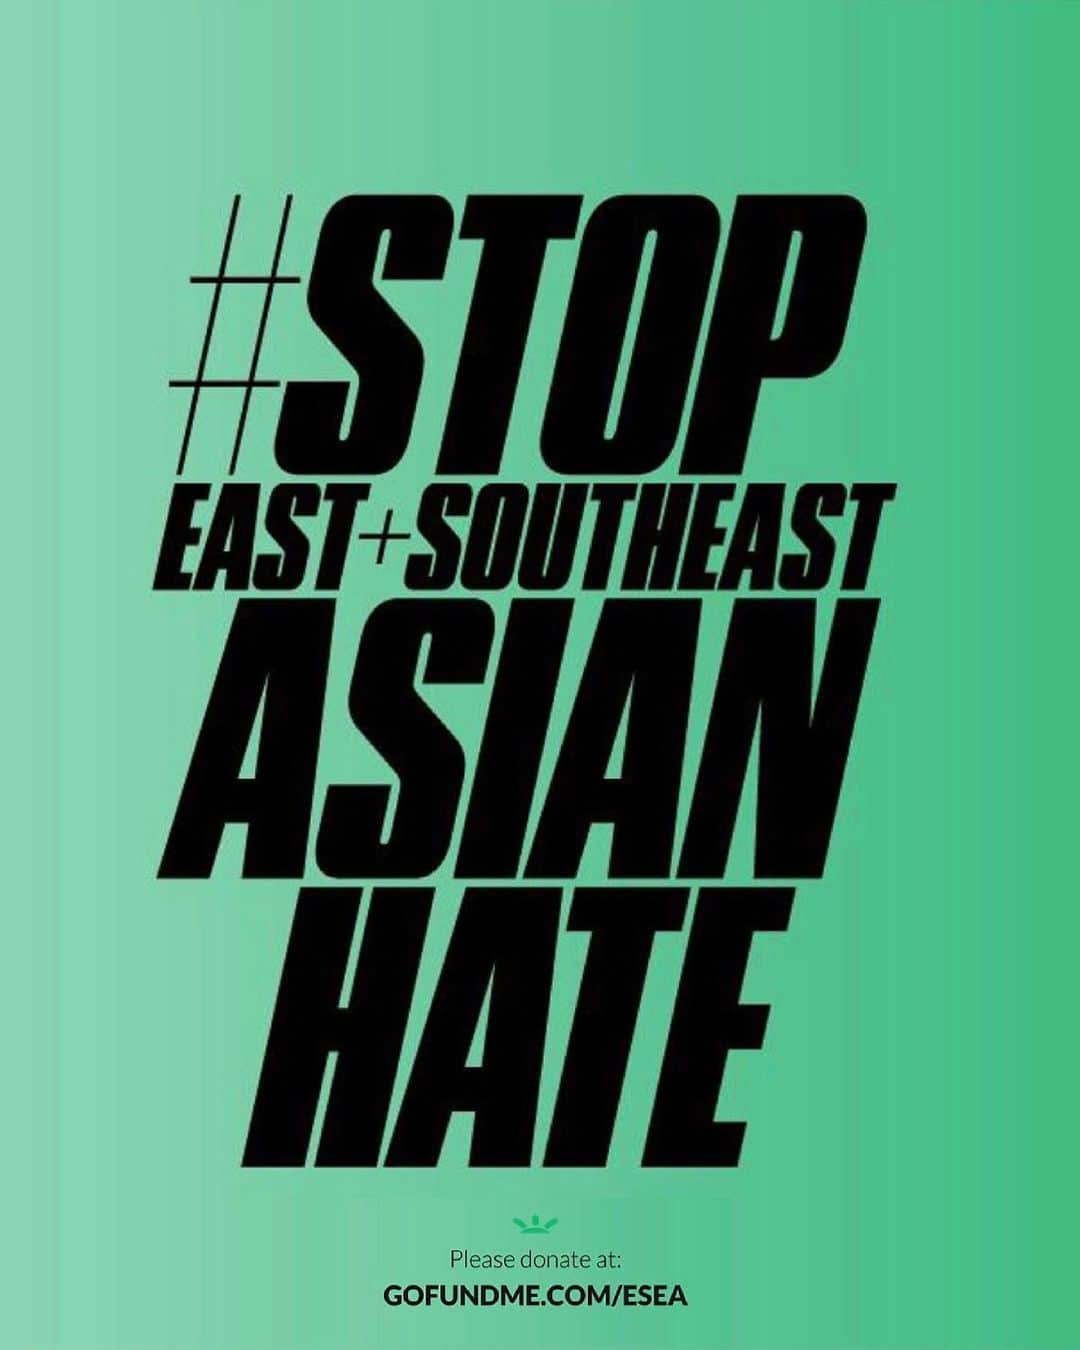 マイア・シブタニのインスタグラム：「Anti-Asian attacks are not confined to the US. If you can, please join @alexshibutani and me in supporting the effort @gemma_chan launched with @gofundmegb @gofundme and other partners at GoFundMe.com/ESEA. #StopESEAHate #StopAsianHate  Repost @gemma_chan Whilst much of the focus regarding anti-Asian attacks has been on the US, we know the problem is global - including a disturbing rise in hate crimes against people of ESEA appearance in the UK. In London alone attacks have tripled over the past year.  Like many others, I worry for family members every time they leave the house or use public transport. My mum has worked for the NHS for most of her life - she and my dad have been followed and subjected to a number of verbal assaults since the beginning of the pandemic. Whilst I’m relieved that these attacks didn’t become physical, unfortunately that is often not the case, such as the unprovoked attack on a 26 year old woman in Edinburgh last week which ended in her hospitalisation, the vicious beating of a university lecturer who was out jogging in Southampton and the physical assault of Singaporean student Jonathan Mok on Oxford Street, amongst many others. What’s even more concerning is that the recorded figures are likely an underestimation because many incidents go unreported, both to the police and in the media.  There is an urgent need for increased awareness and support so I am proud to help launch this fund, which will provide grants to grassroots organisations supporting ESEA and broader communities.  Please share and donate if you can at GoFundMe.com/ESEA (link in bio)  Thank you to everyone who has supported this effort, particularly the teams at @gofundme @goldhouseco @capeusa 🙏🏼 #StopAsianHate #StopESEAhate #EveryoneVsRacism」